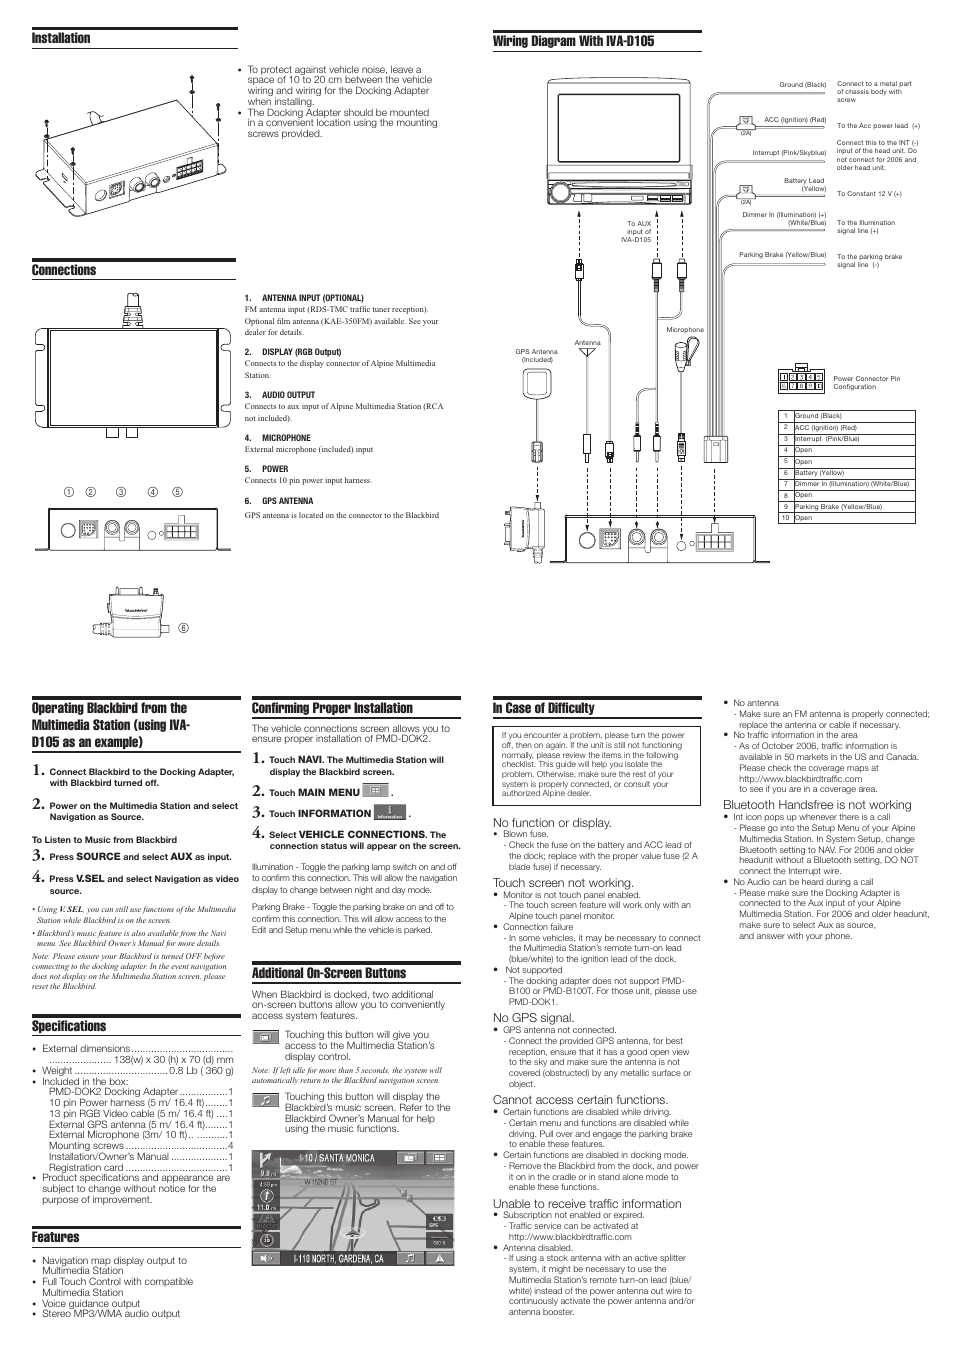 Connections, Wiring diagram with iva-d105, Specifications | Features, Installation, Confirming proper installation, Additional on-screen buttons | Alpine Blackbird Docking Adapter PMD-DOK2 User Manual | Page 2 / 2